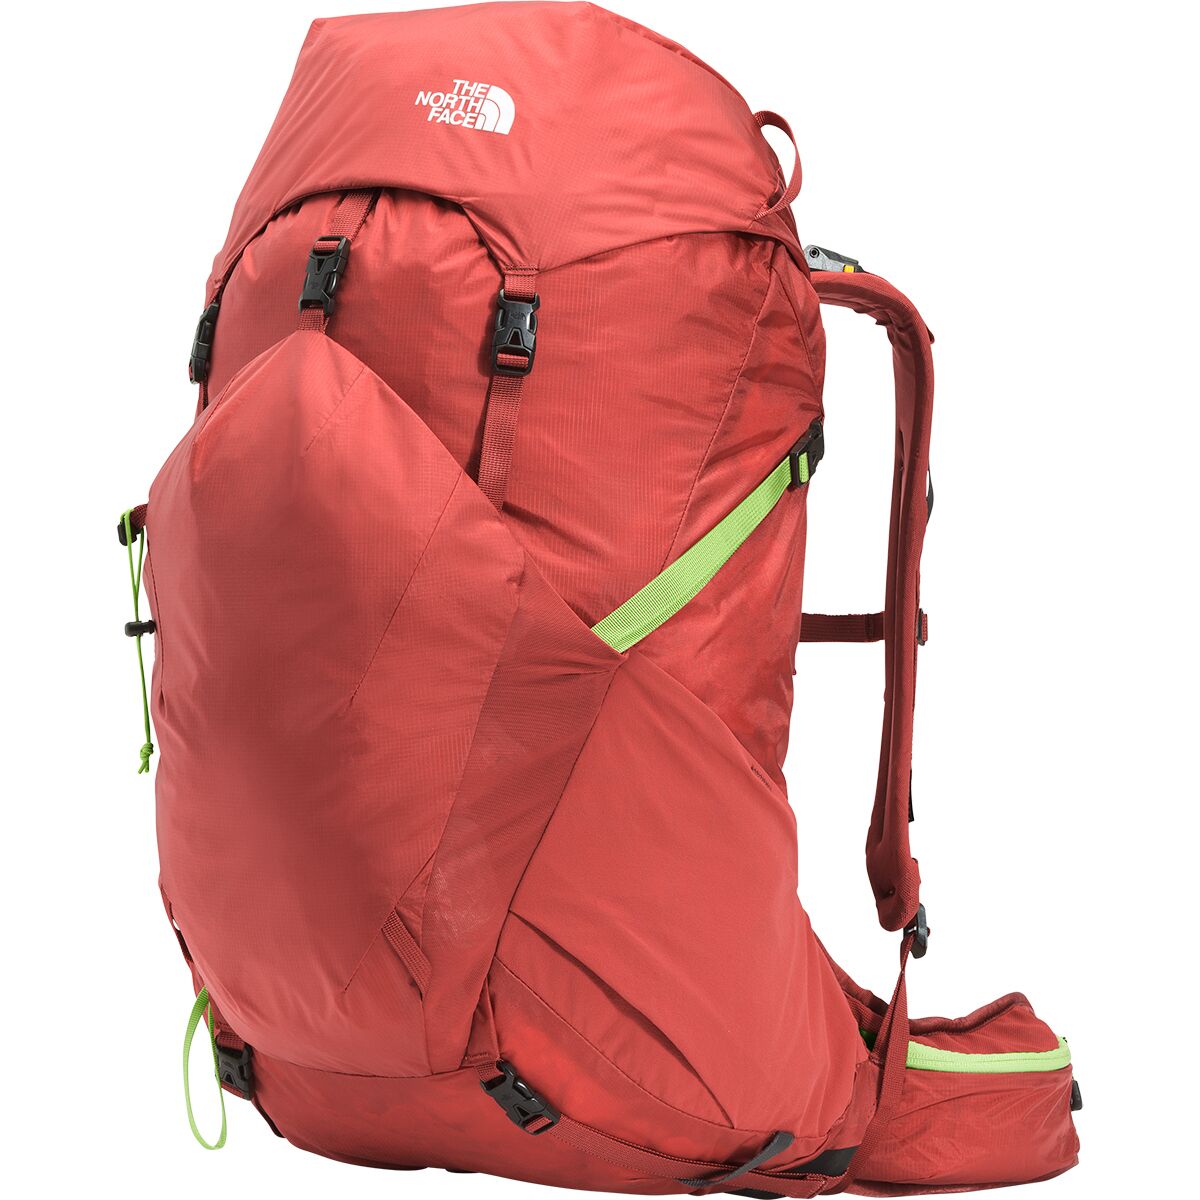 The North Face Hydra 38L Backpack - Women's